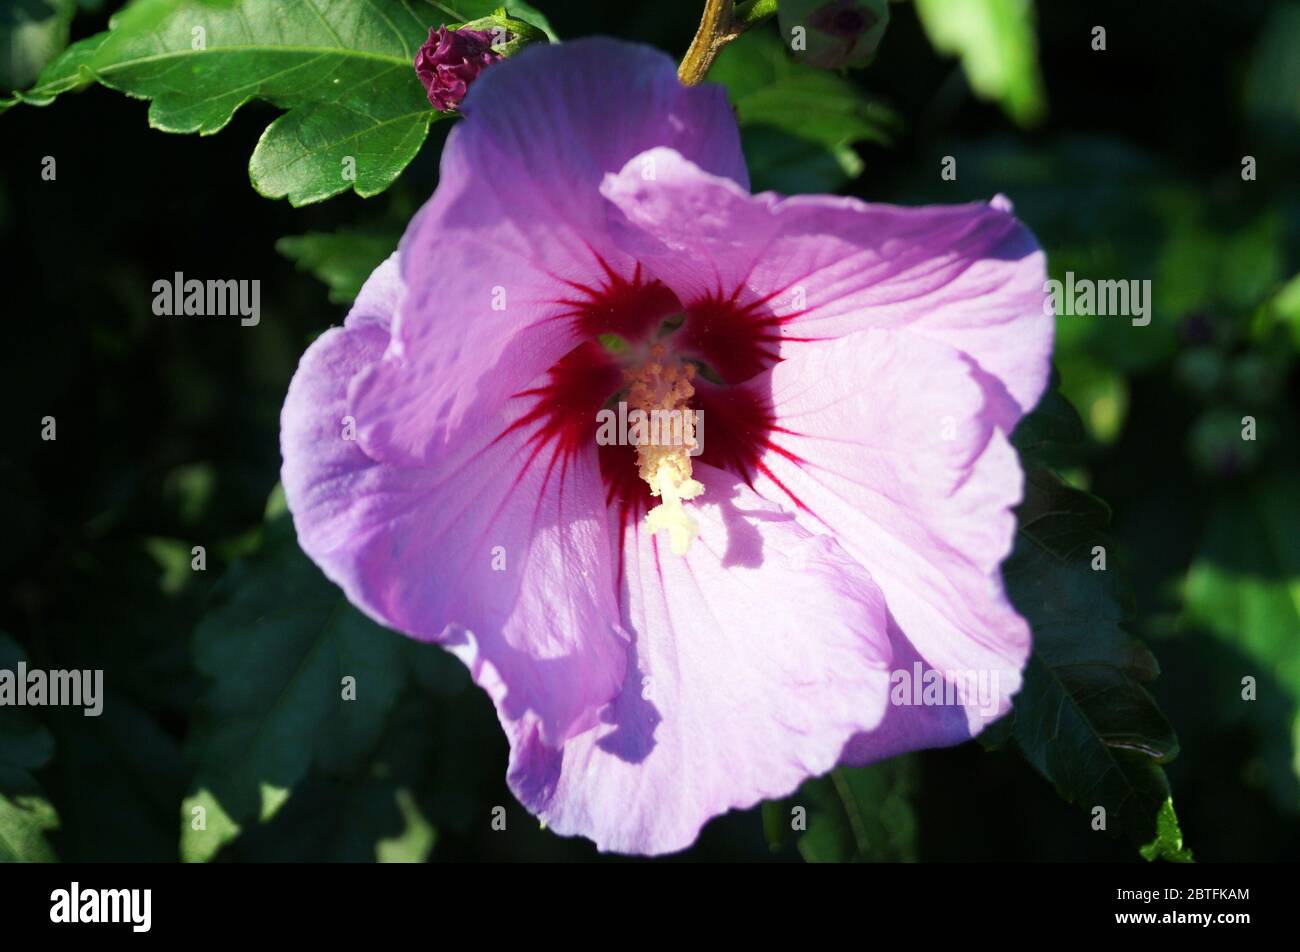 Hibiscus flower with delicate purple petals and a white center on a bush with green leaves Stock Photo